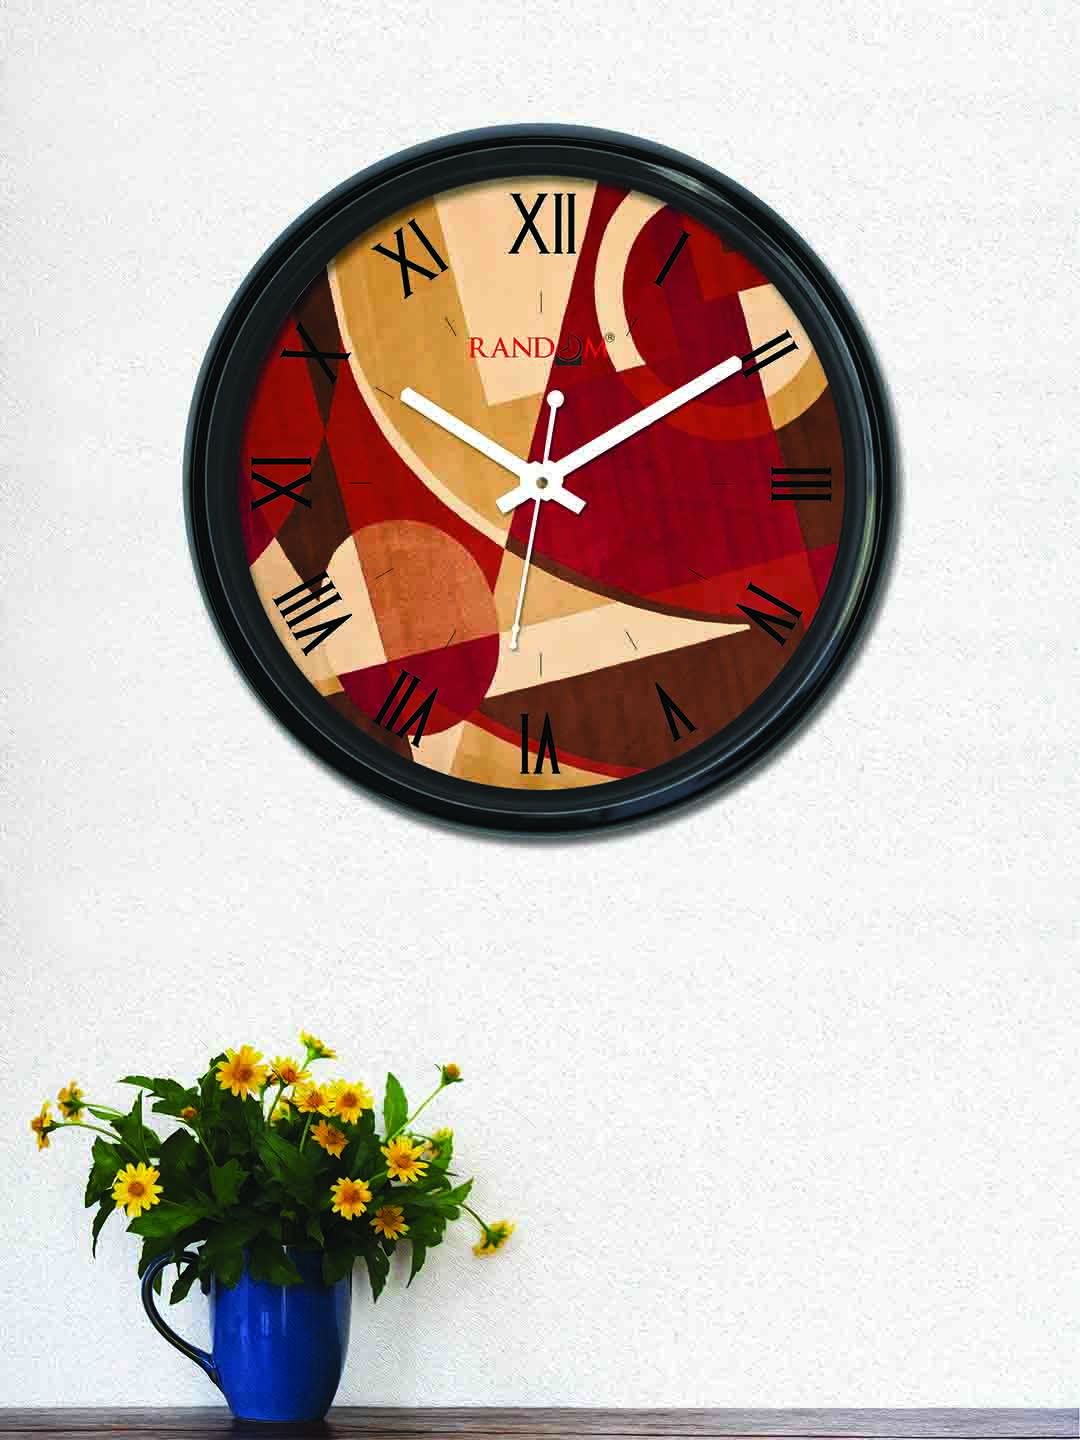 RANDOM Brown & Maroon Round Printed 30 cm Analogue Wall Clock Price in India